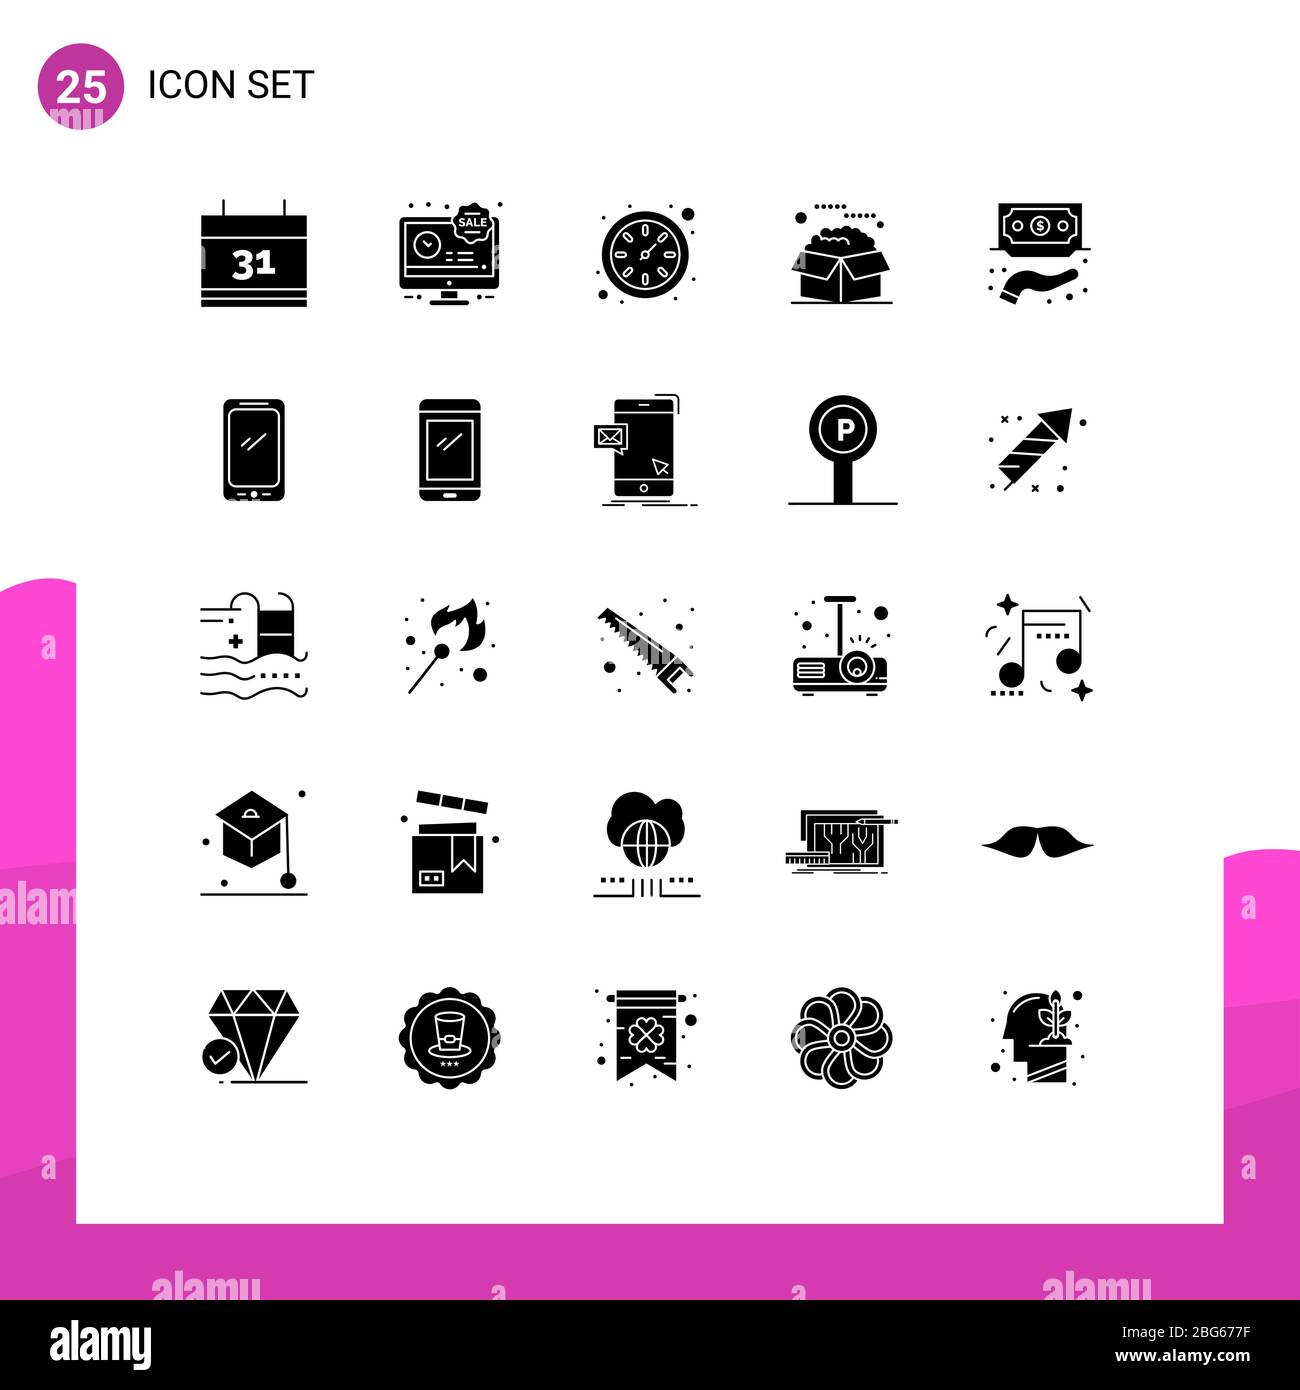 Mobile Interface Solid Glyph Set of 25 Pictograms of funds, financing, time, service, product Editable Vector Design Elements Stock Vector